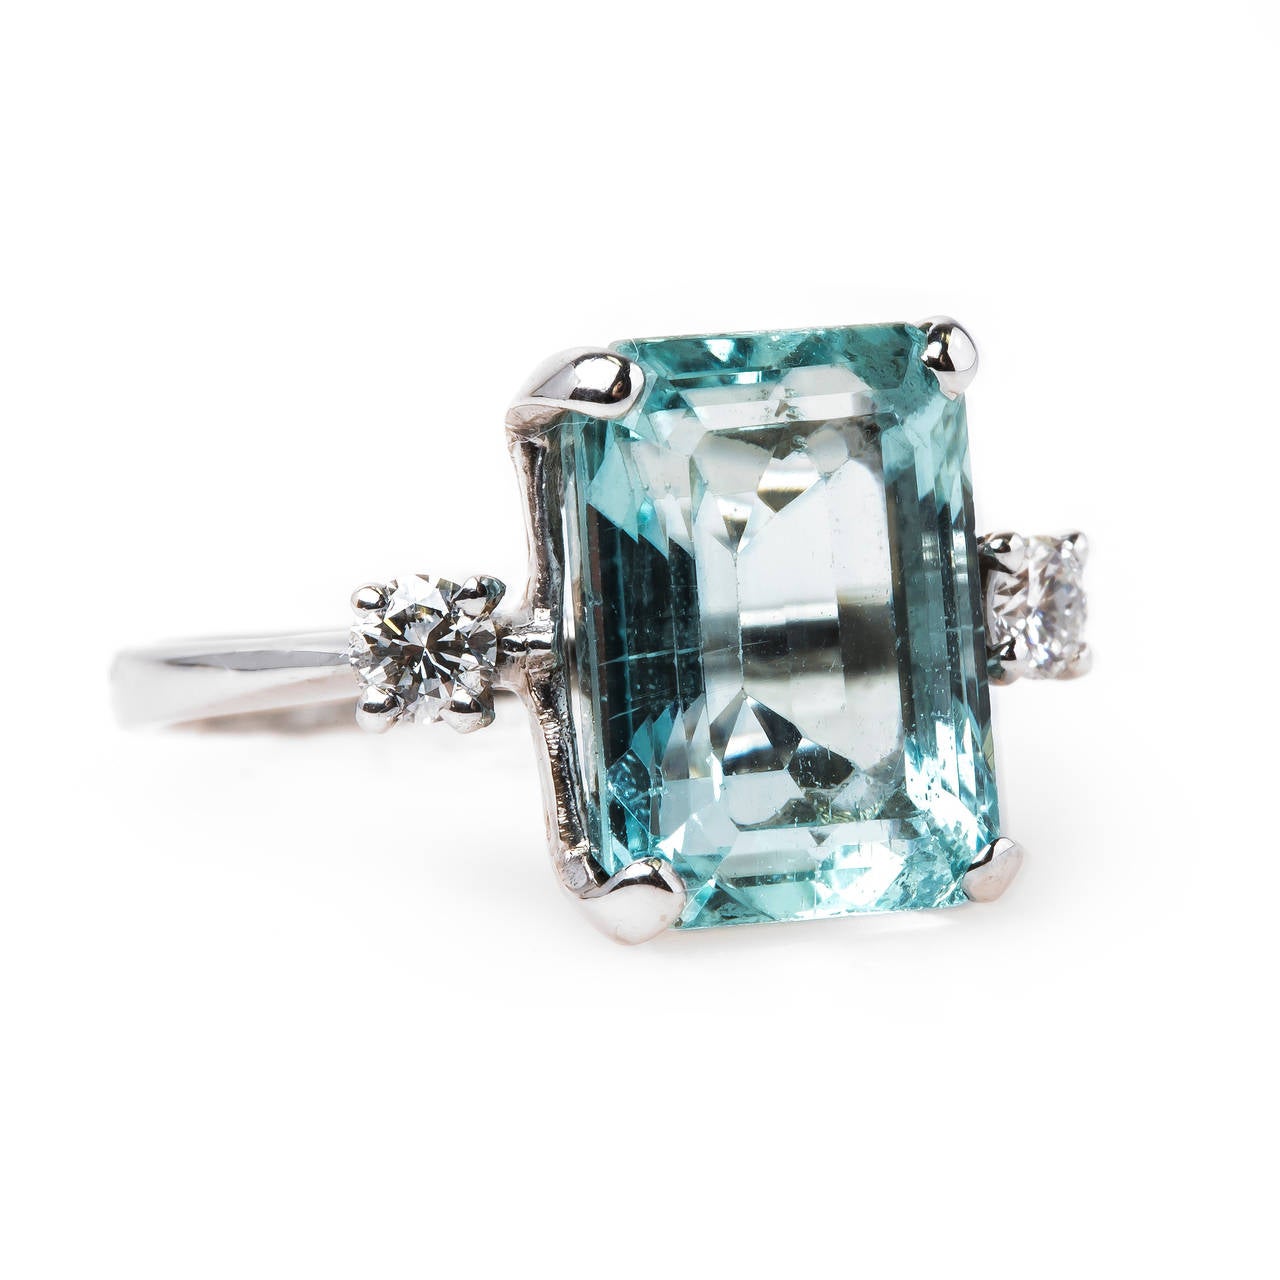 Whitsett is the epitome of Retro era (circa 1940) cocktail ring design. This fabulous ring centers a show-stopping Rectangular Step-Cut natural aquamarine set in 14k white gold and gauged at approximate 4.50ct (11.9mm x 8.8mm). The ring is further